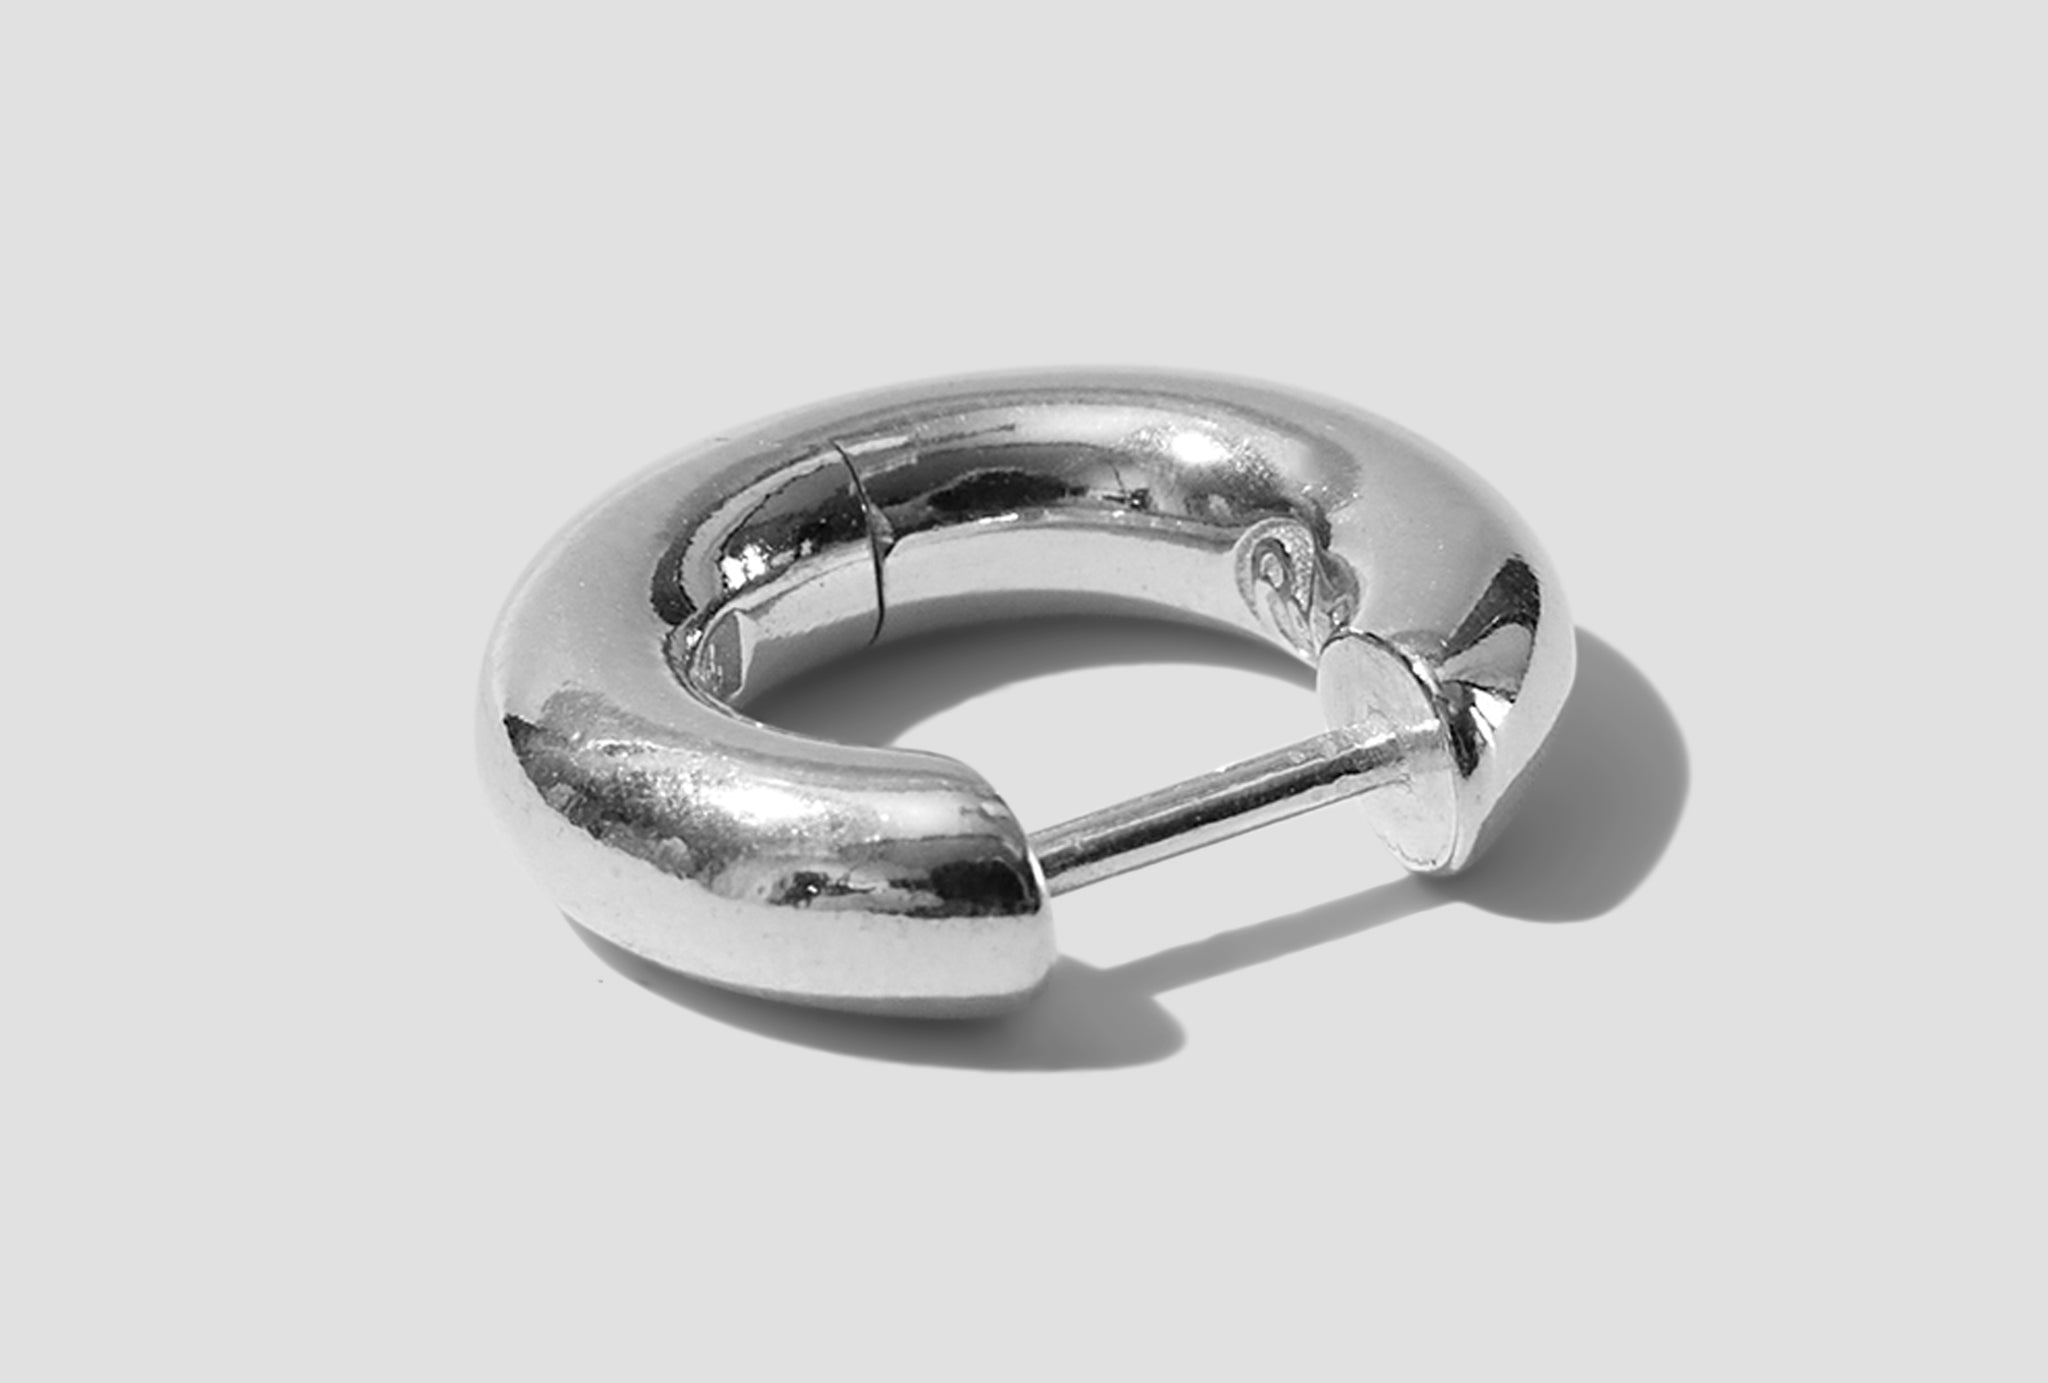 ALMOST EARRING SMALL - POLISHED / STERLING SILVER 101640-S Silver